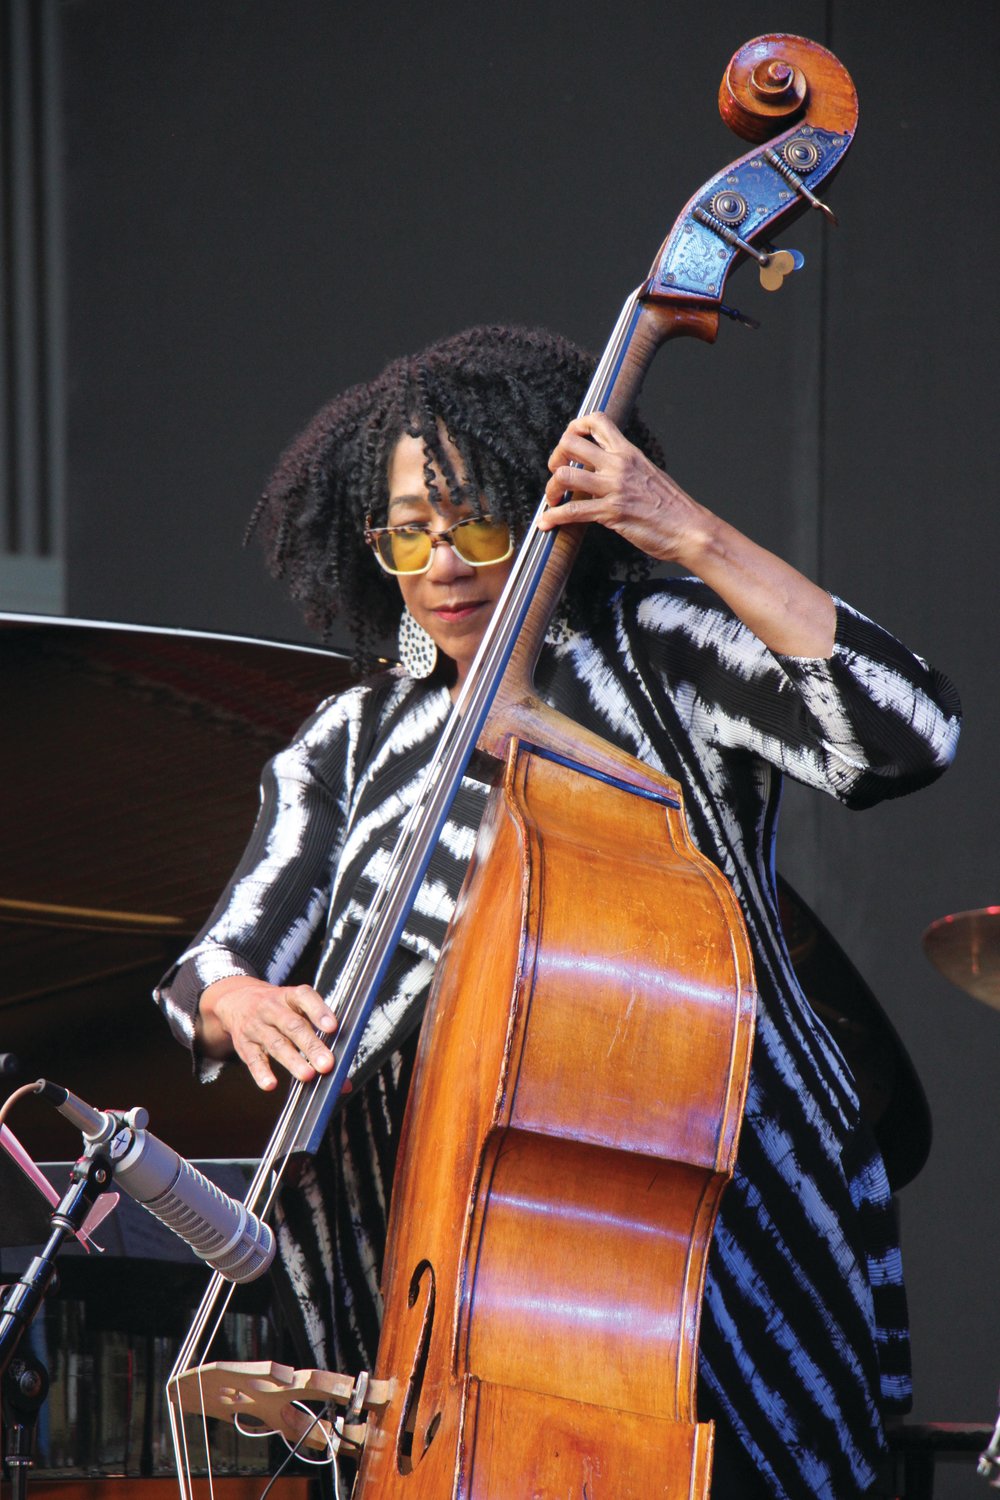 Musician Marion Hayden plays out the beat of a song on the upright bass.